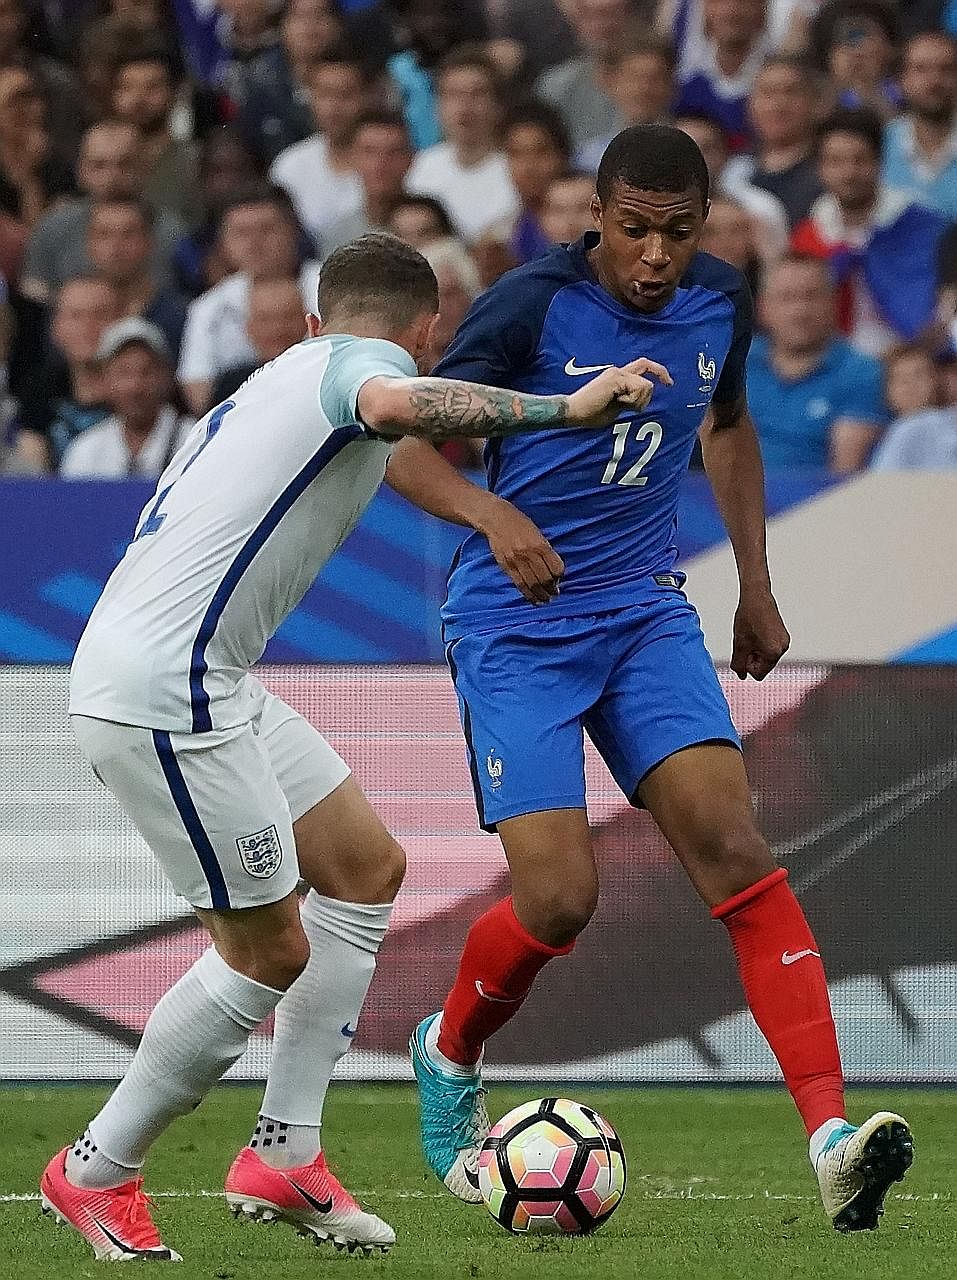 French teenager Kylian Mbappe (right) takes on England defender Kieran Trippier during the 3-2 victory against Gareth Southgate's team on Wednesday. Real Madrid are in pursuit of the Monaco forward, as are Paris Saint-Germain, Arsenal, Chelsea, Liver